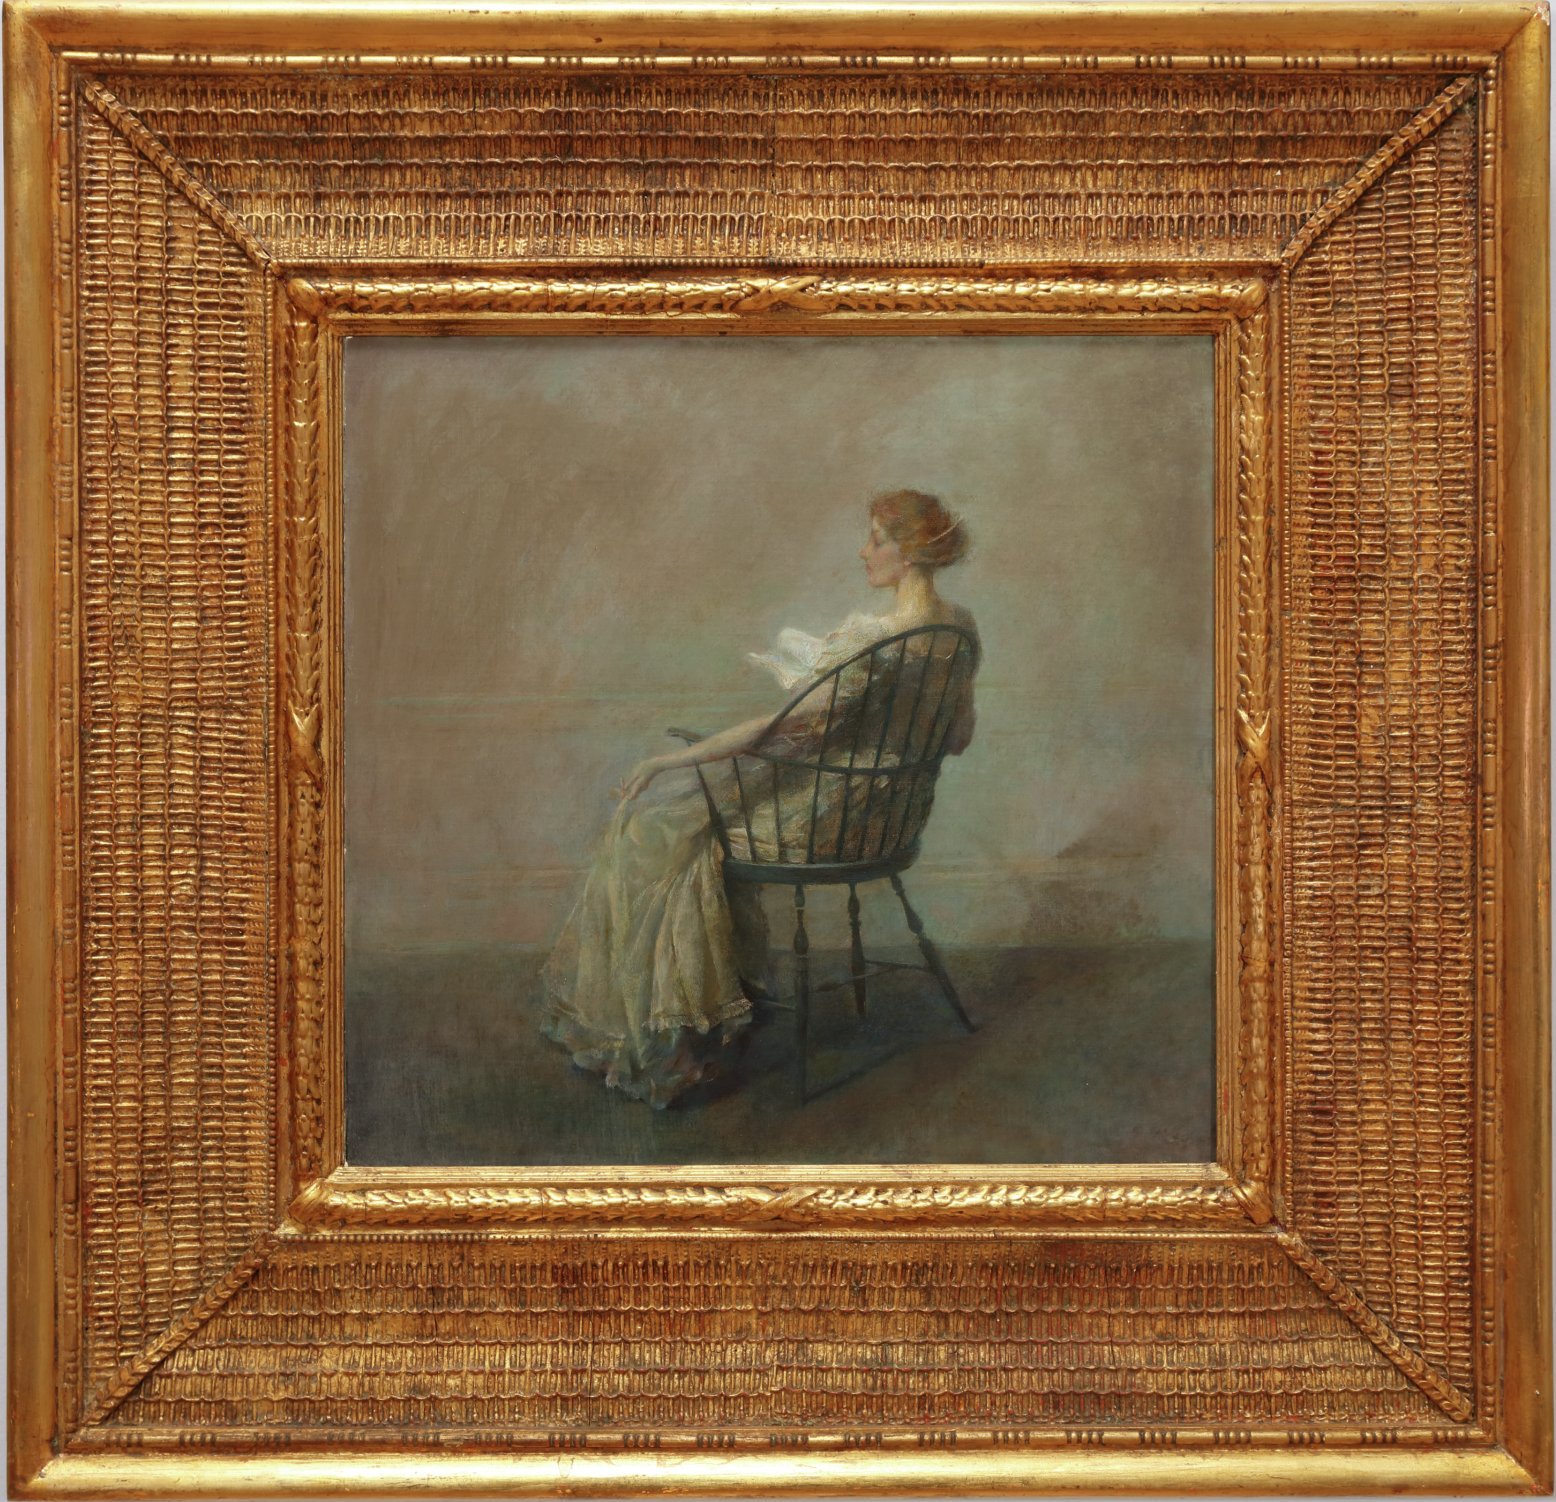 A Reading (or Woman in Windsor Chair) by Thomas Wilmer Dewing - ca. 1909 - 20 1/4 x 21 1/2 inches High Museum of Art